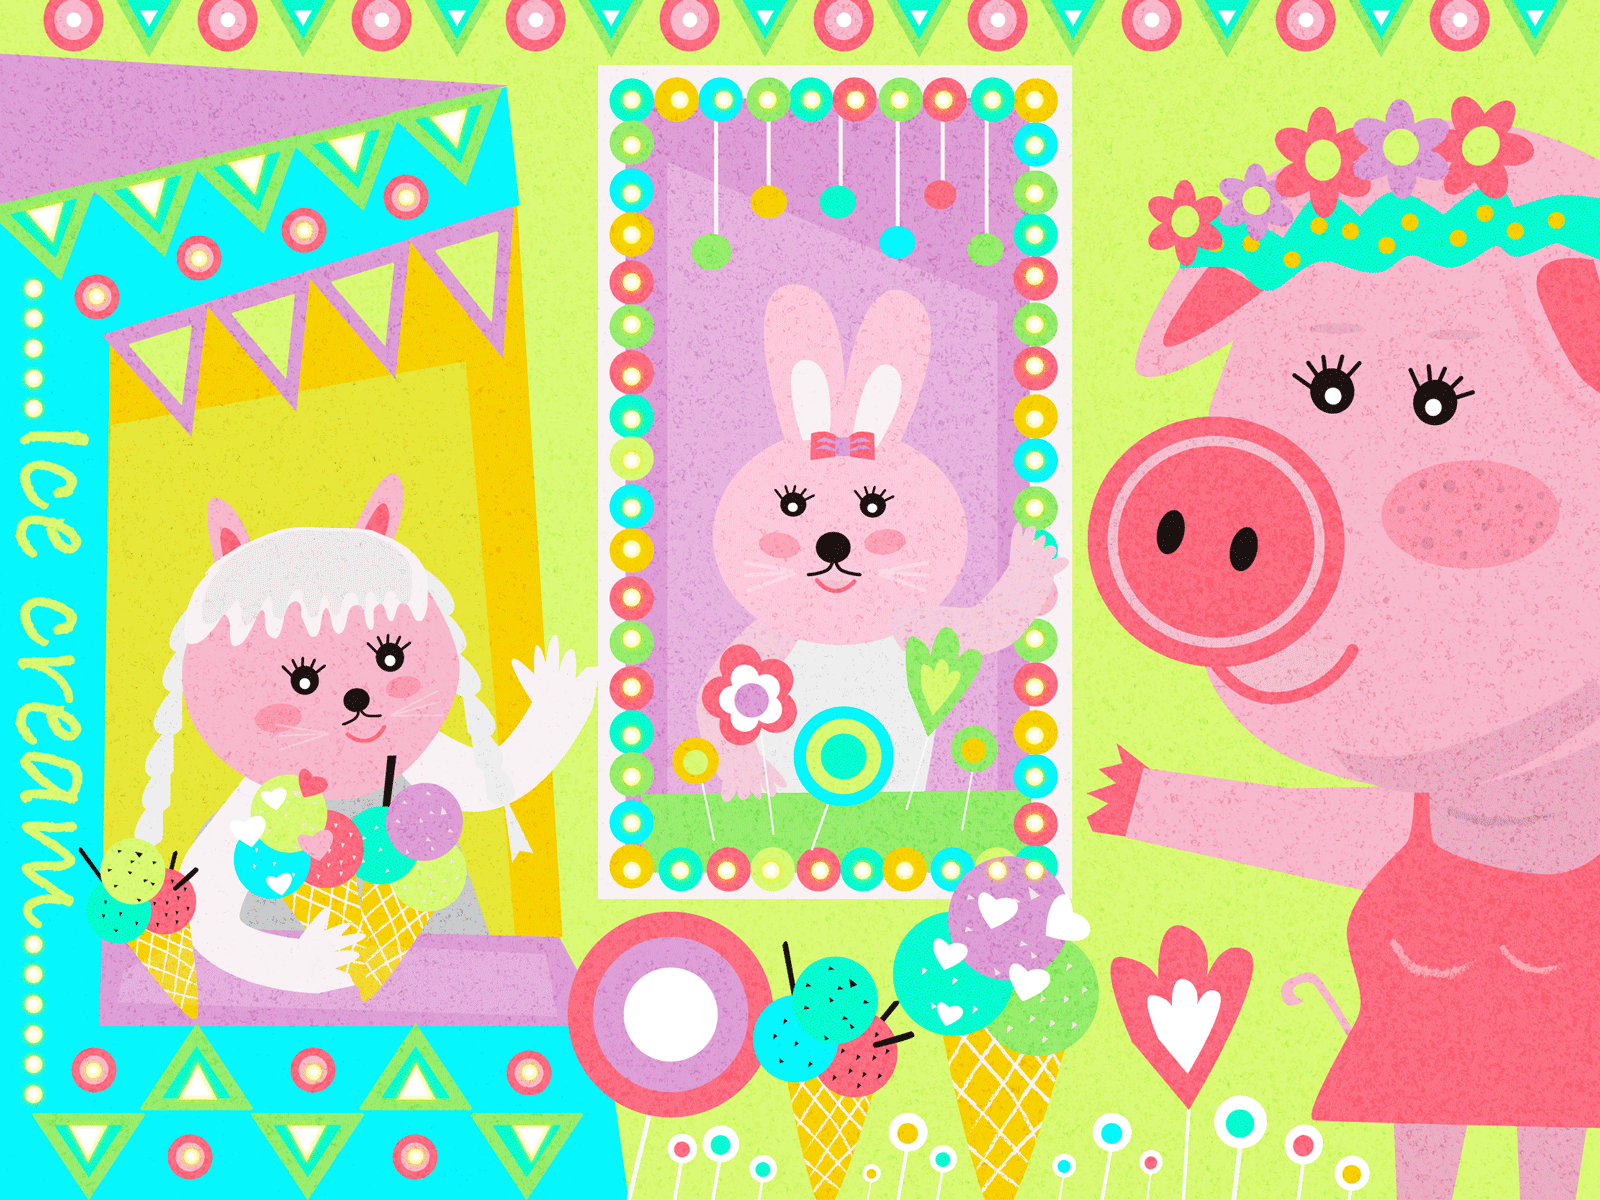 My favorite game to play with babies gif grass mud horse illustration pig play rabbit